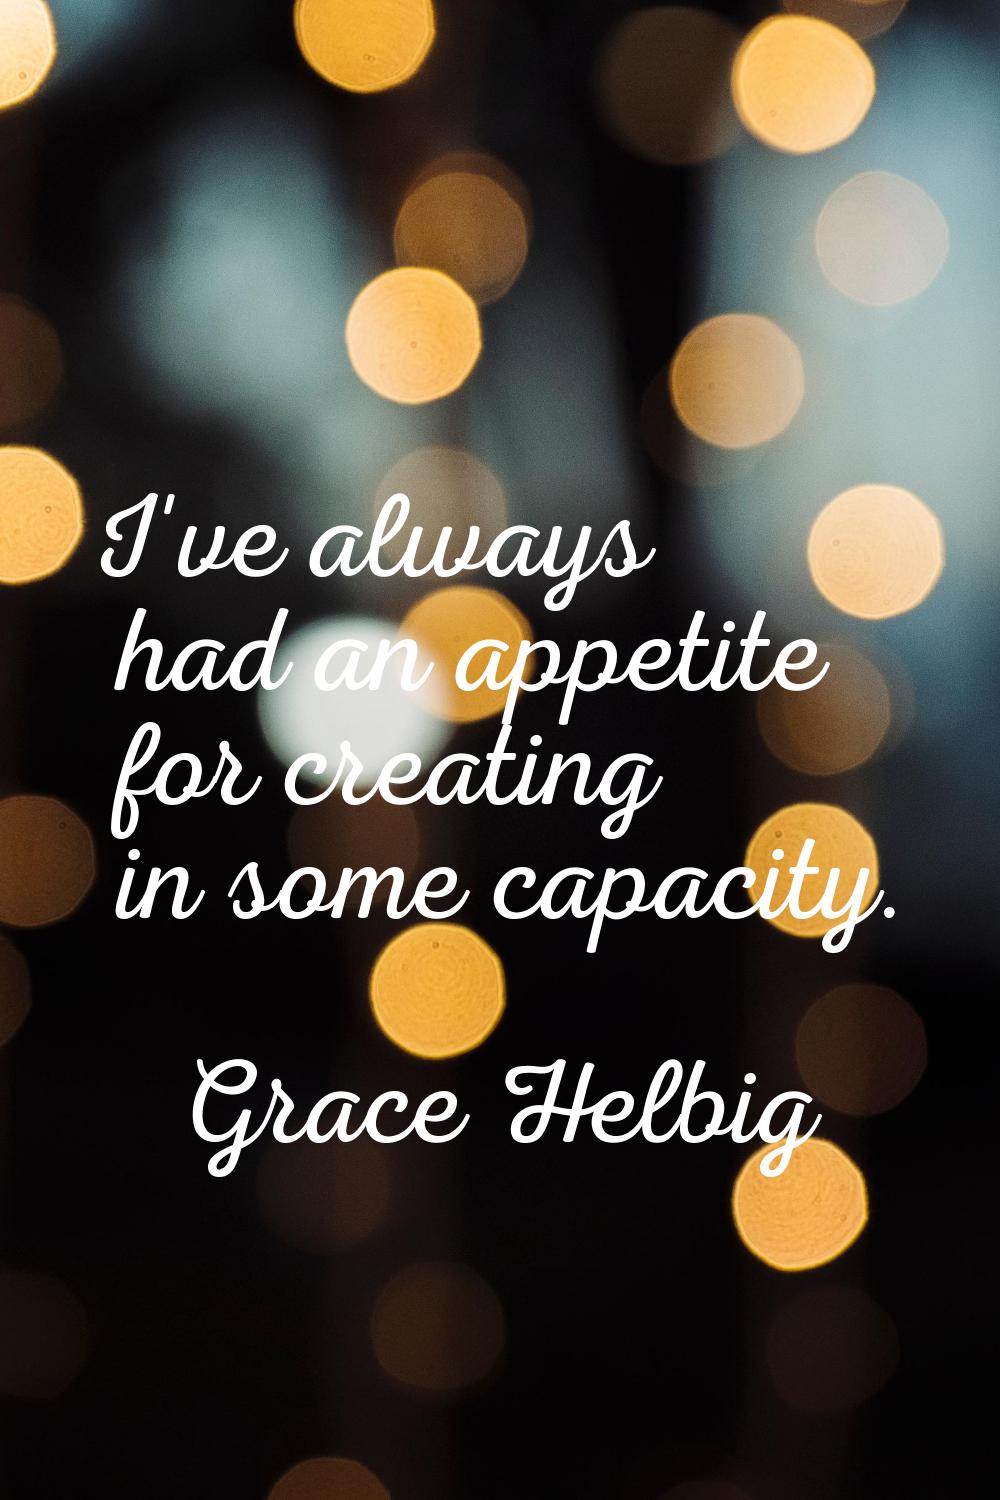 I've always had an appetite for creating in some capacity.